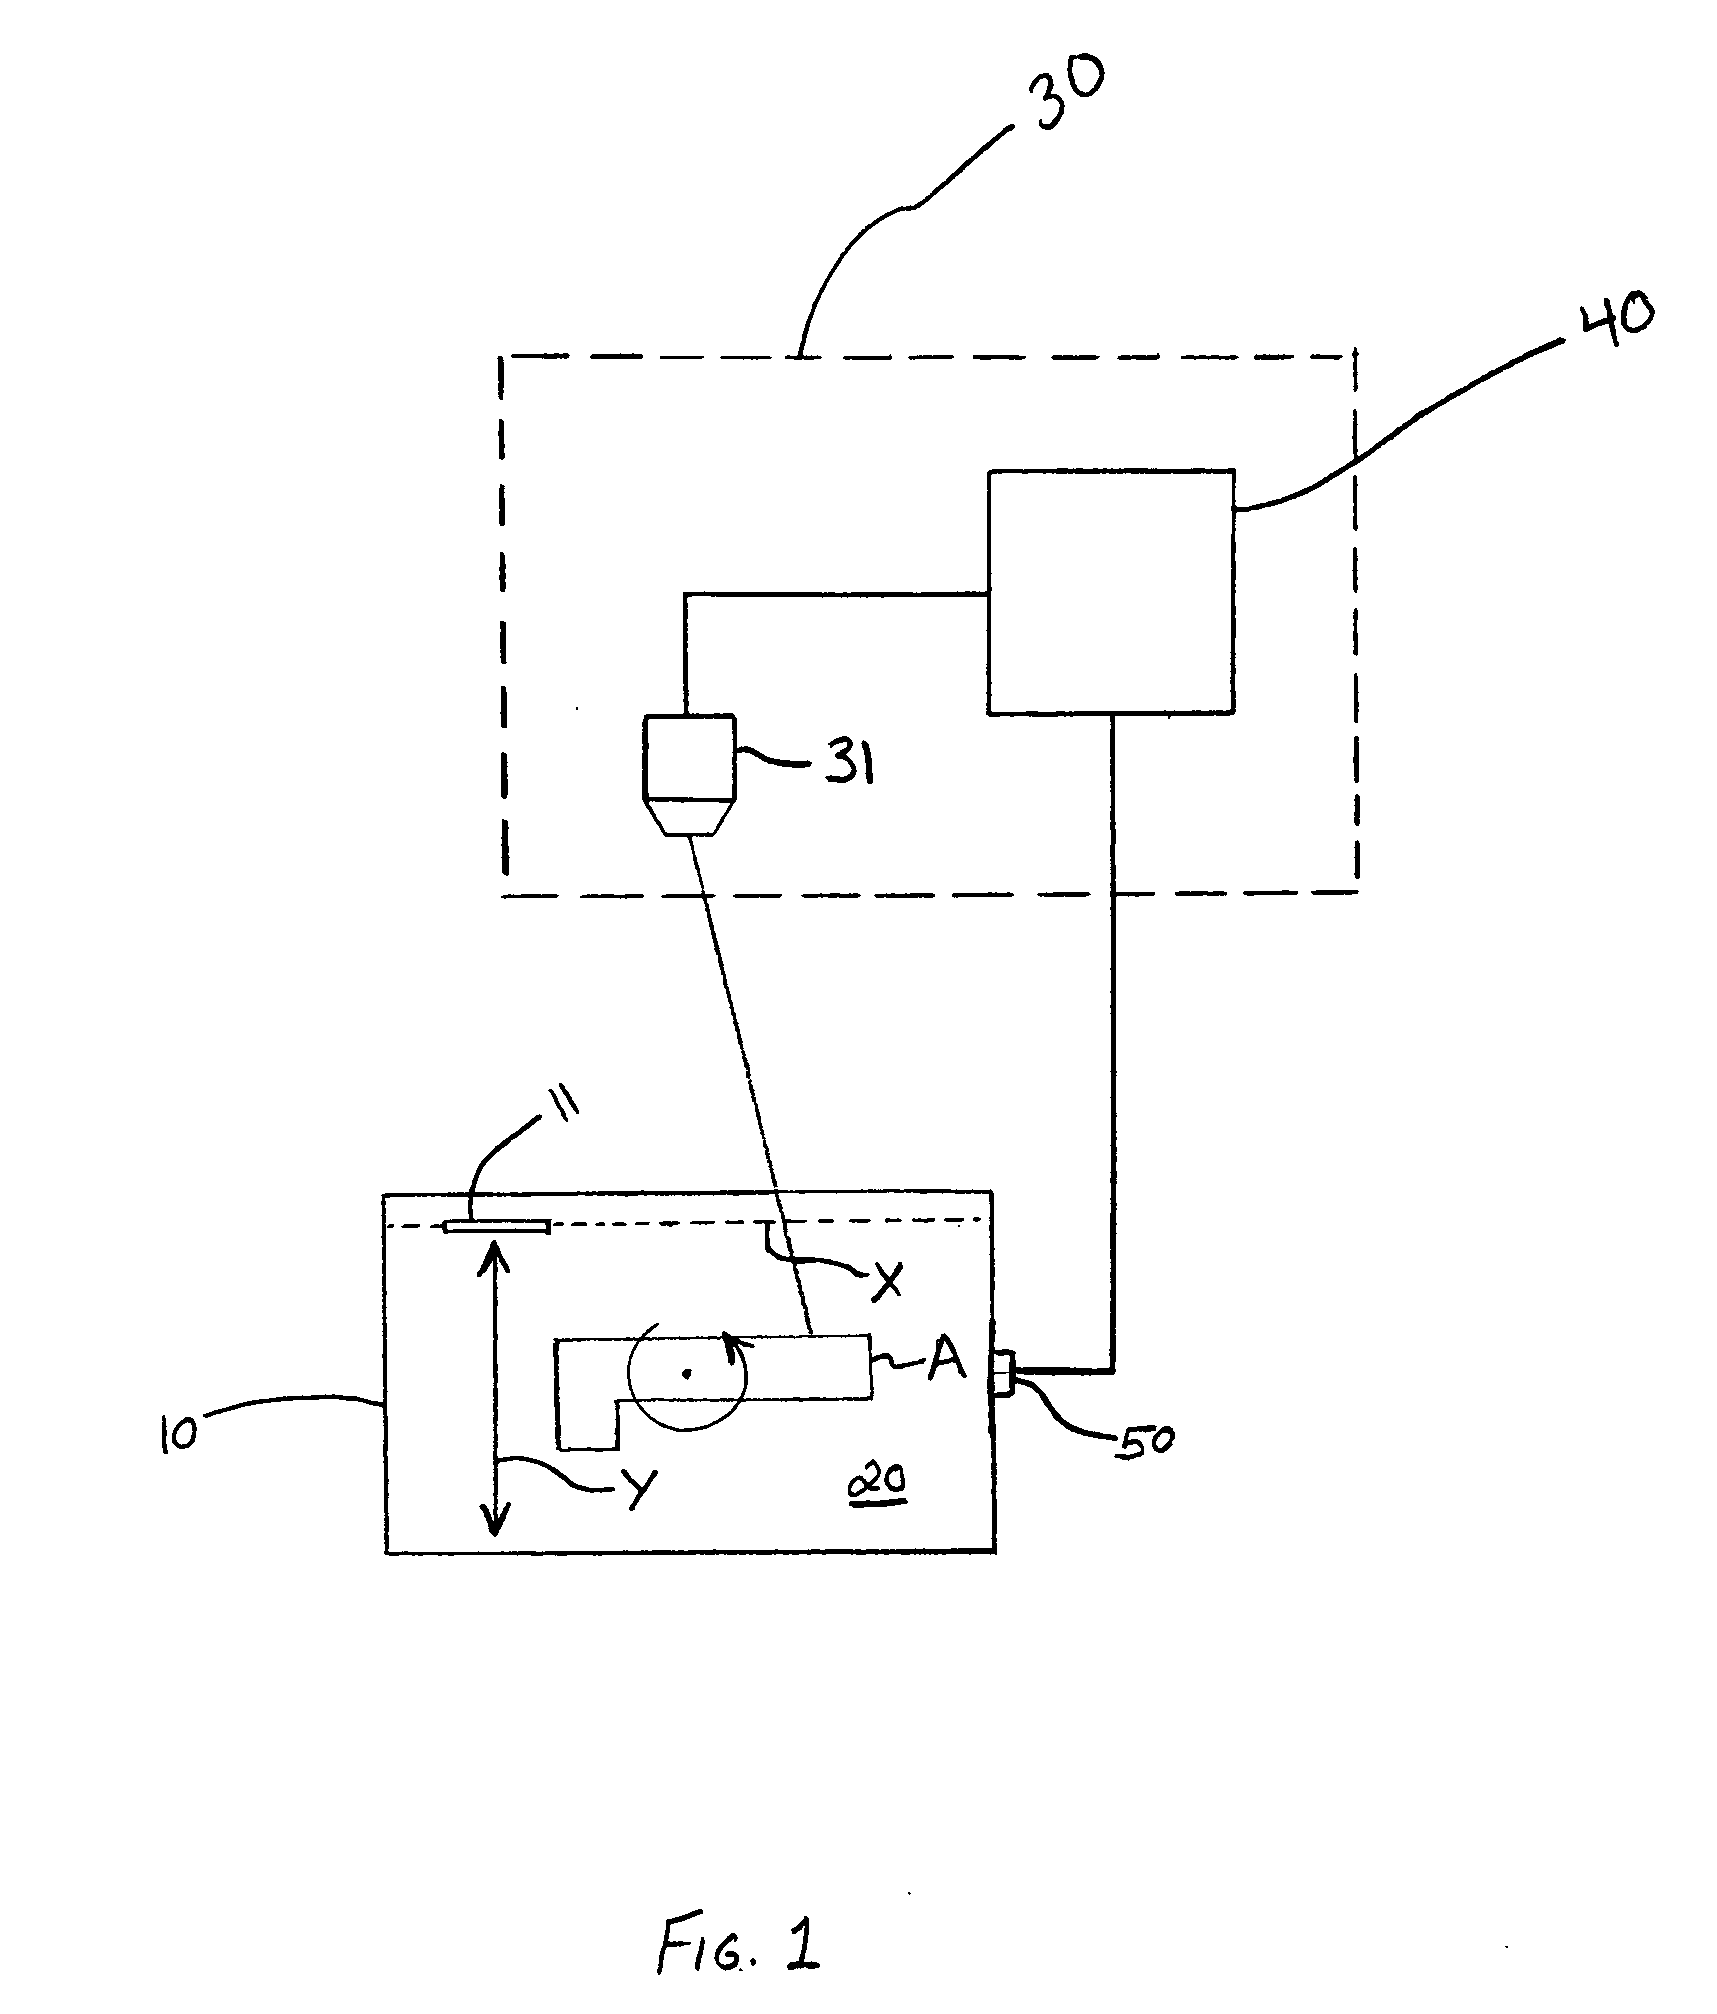 Systems and methods for displaying images and processing work pieces